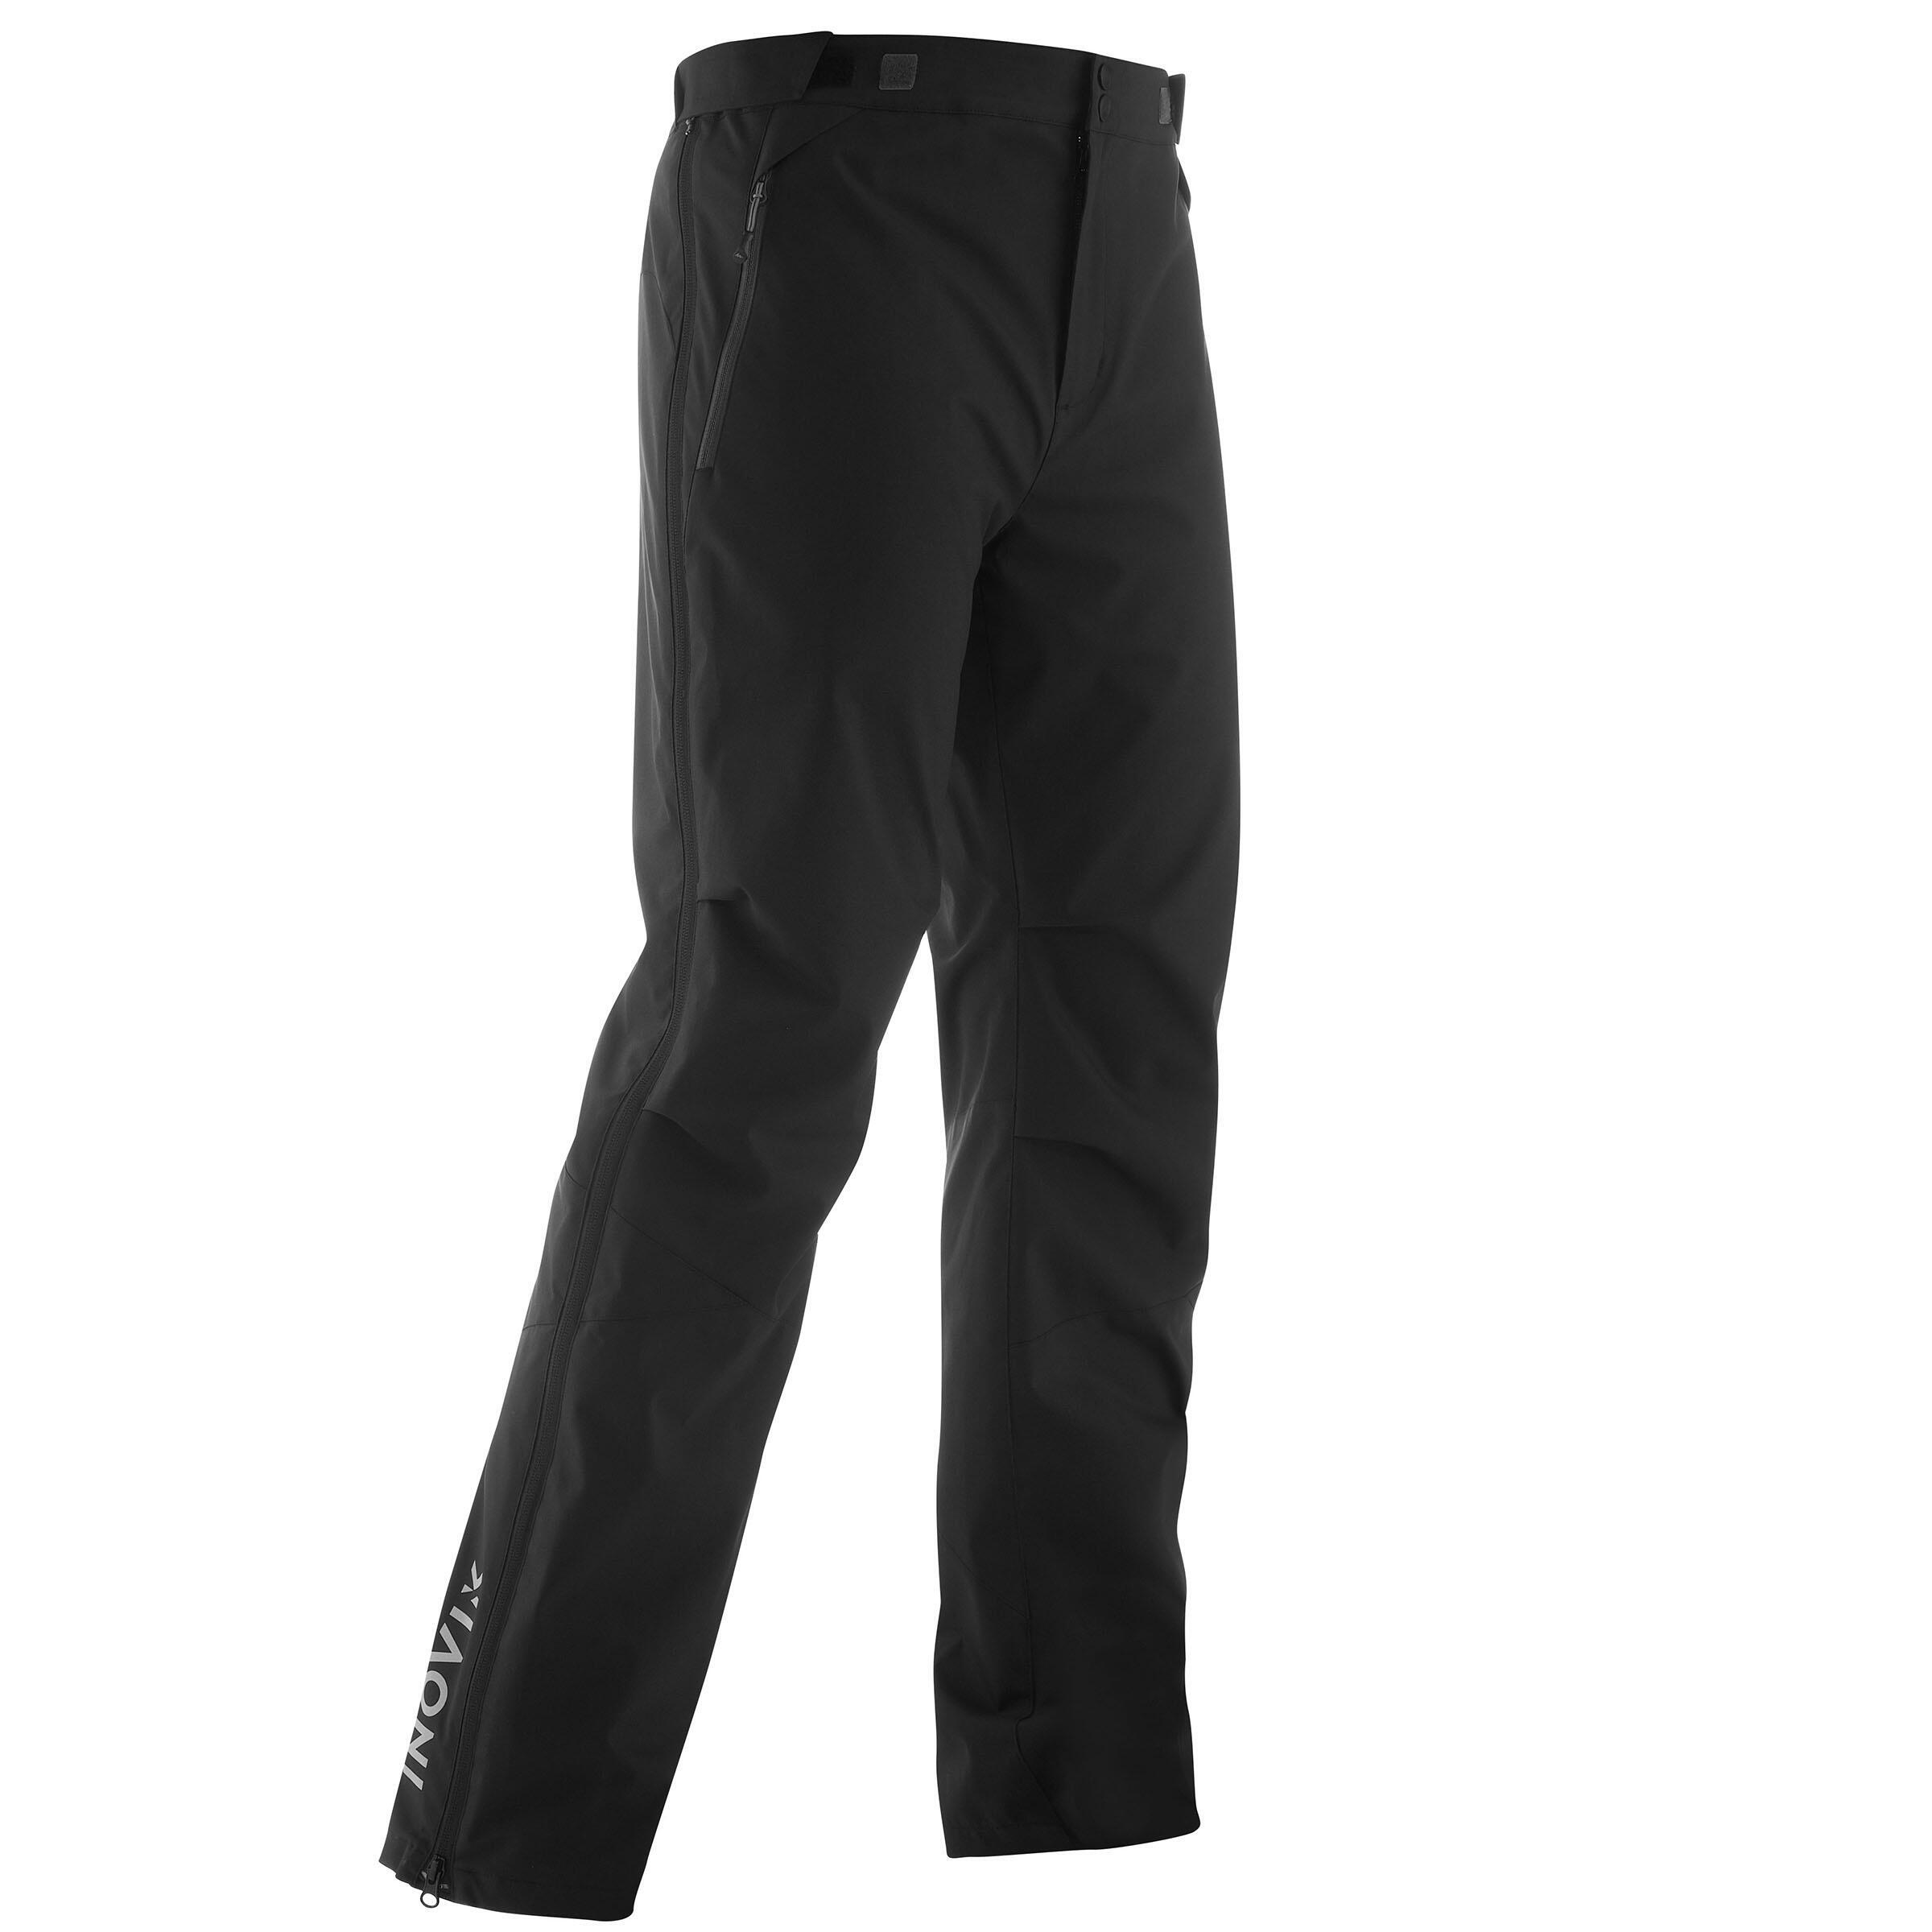 MEN'S Cross-Country Skiing Over-Trousers XC S OVERP 150 - Black 1/8